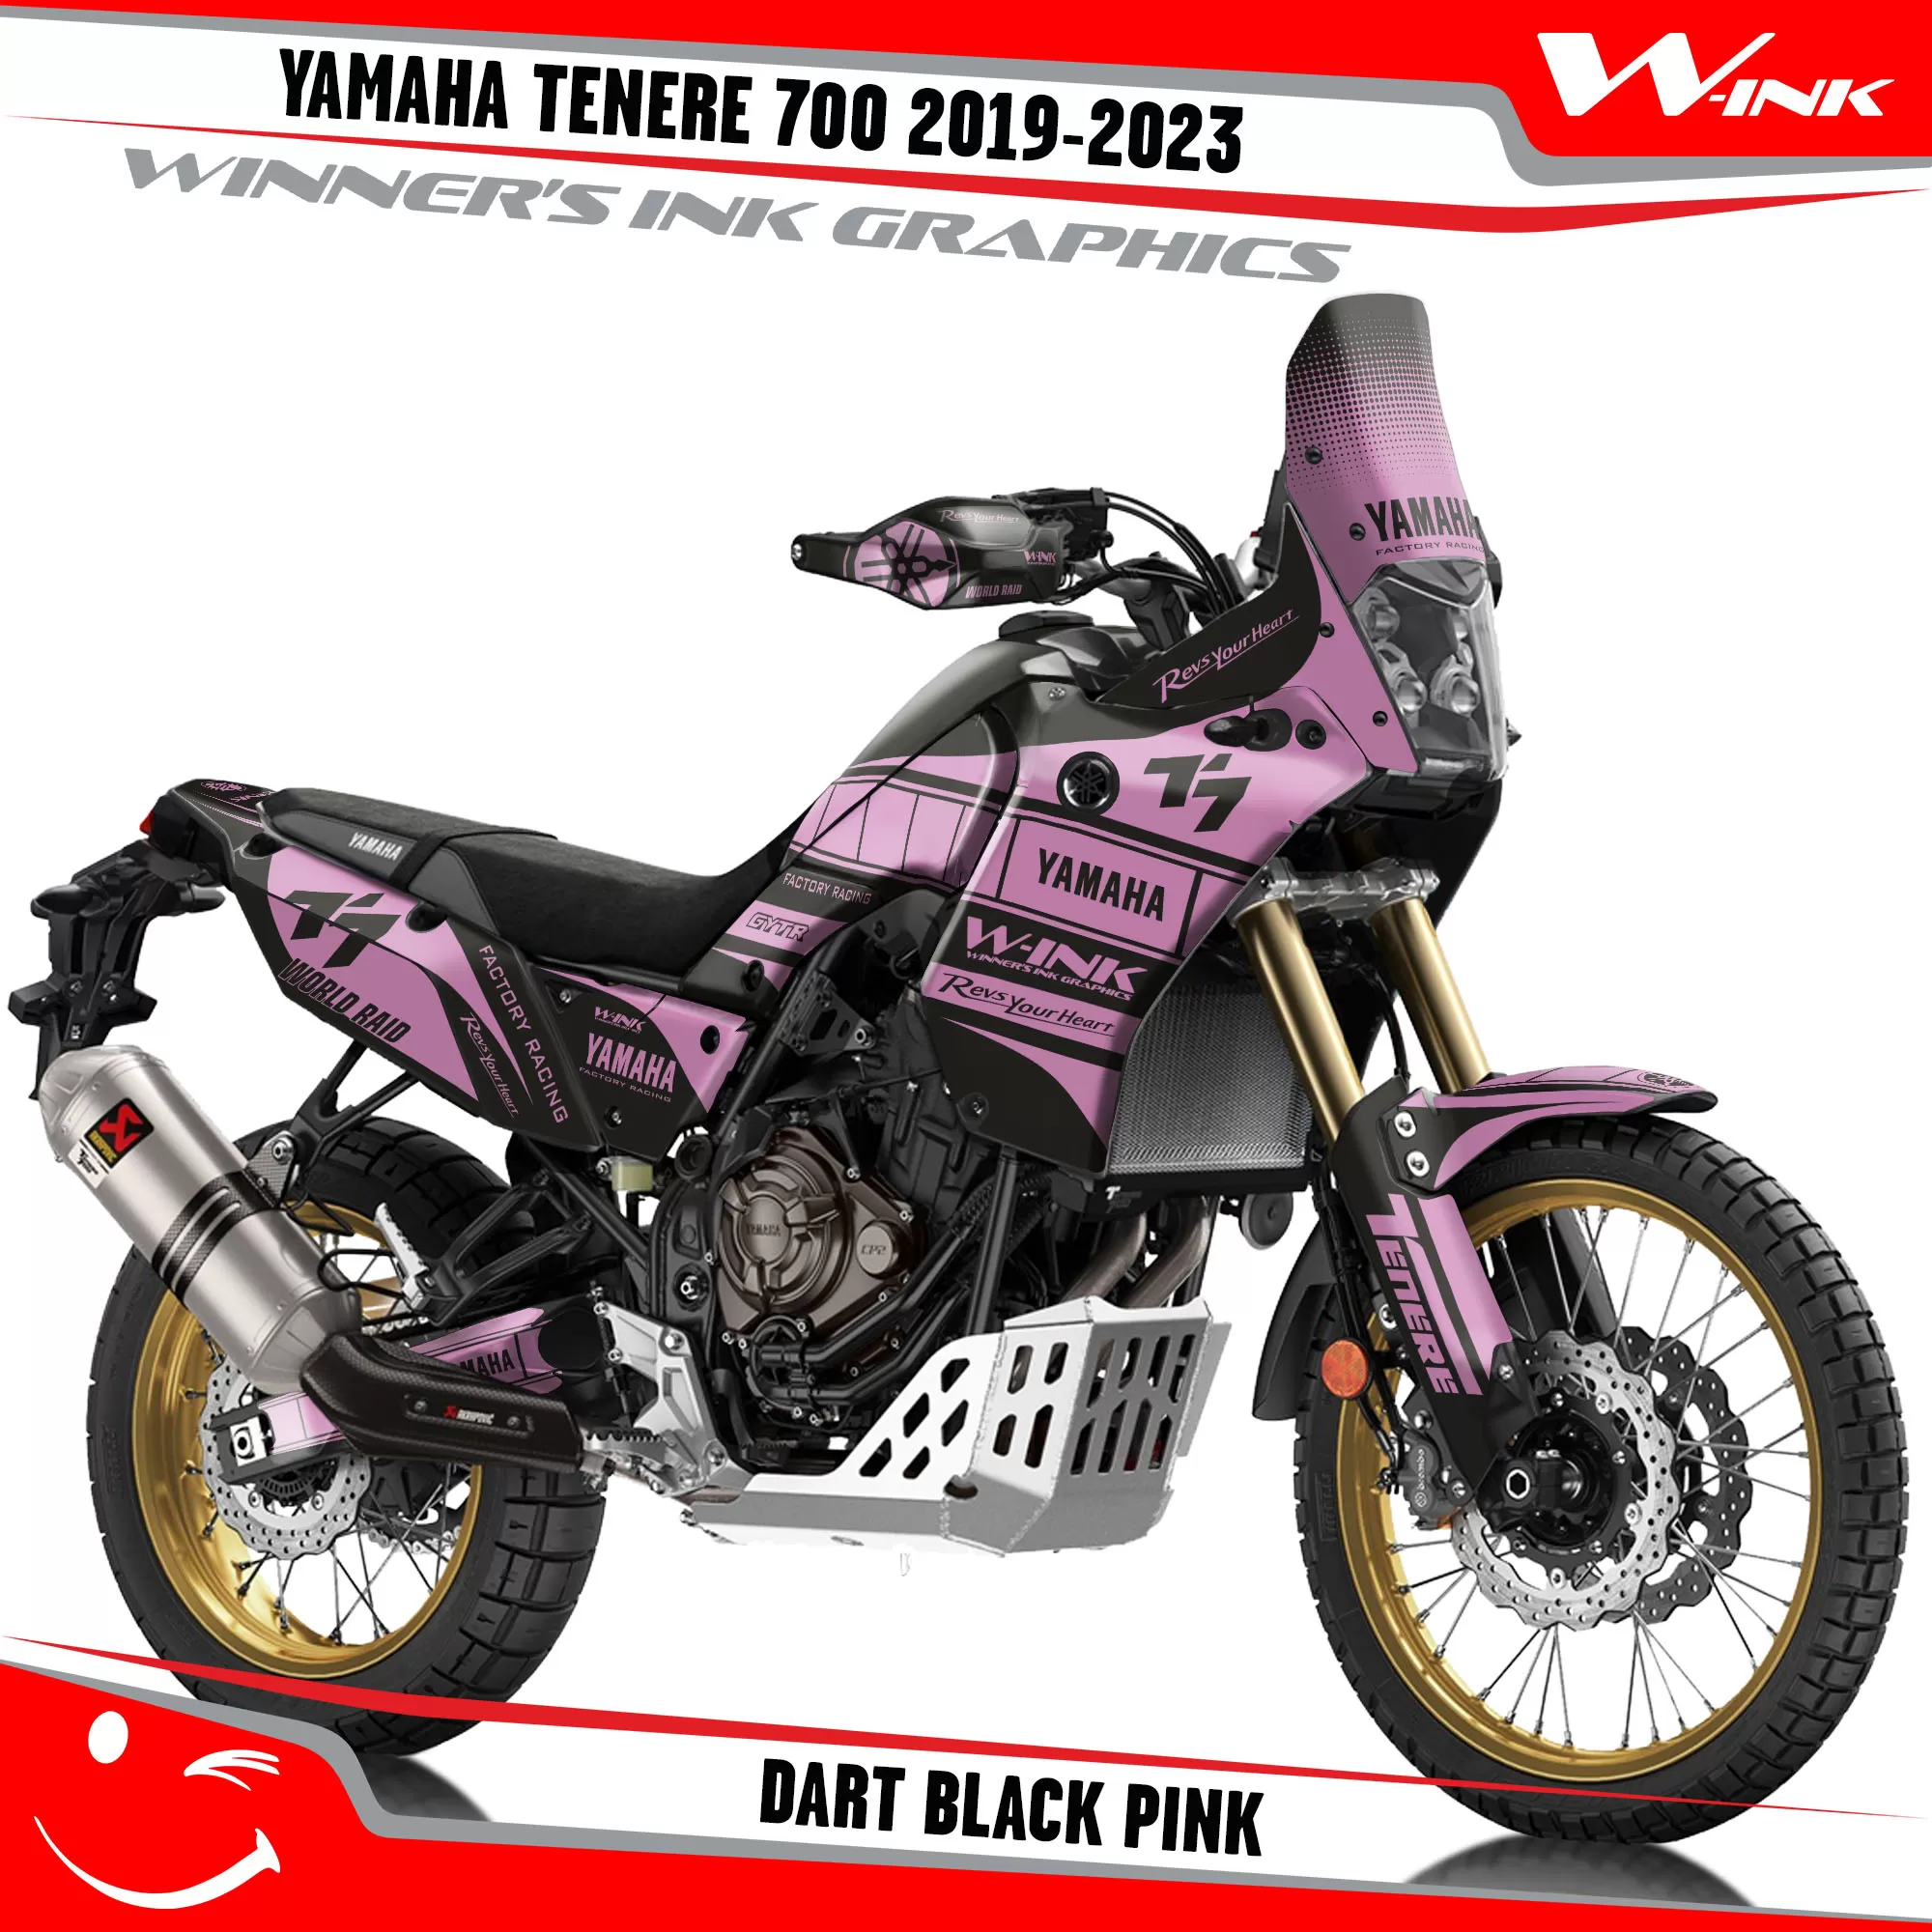 Yamaha-Tenere-700-2019-2020-2021-2022-2023-graphics-kit-and-decals-with-desing-Dart-Full-Black-Pink